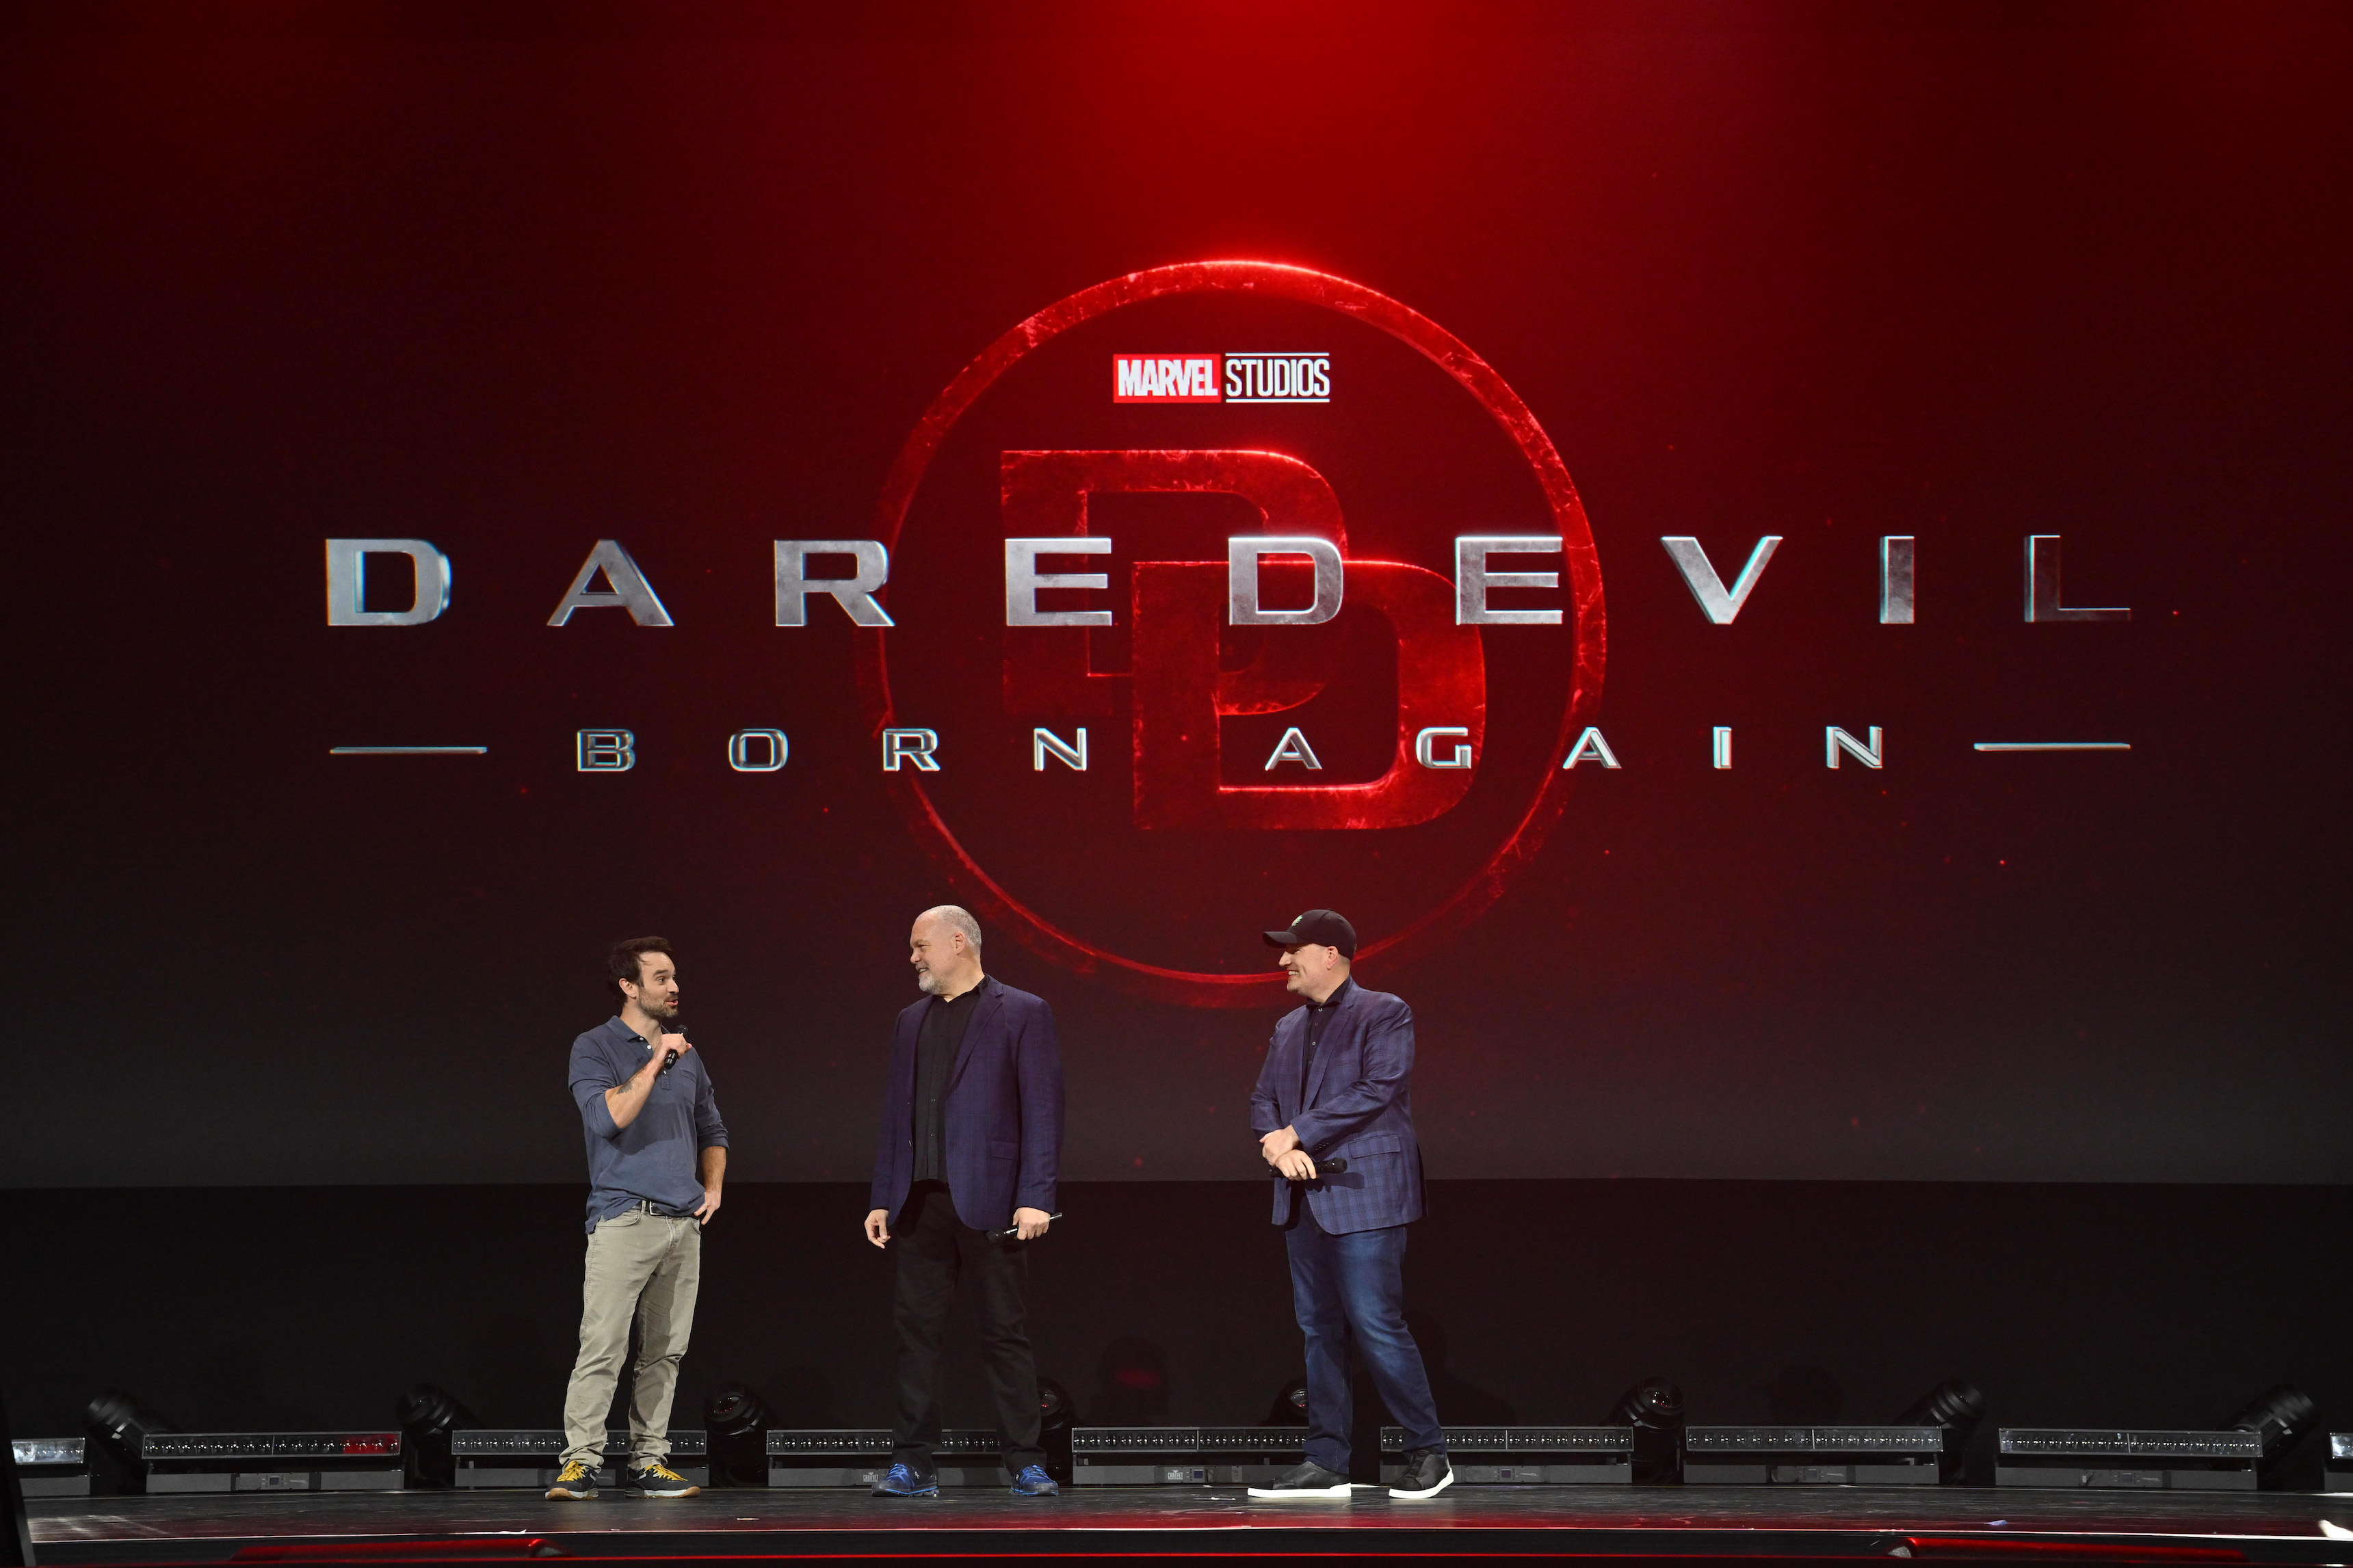 ‘Daredevil: Born Again’: Cast We Want to See in the Upcoming Disney+ Series